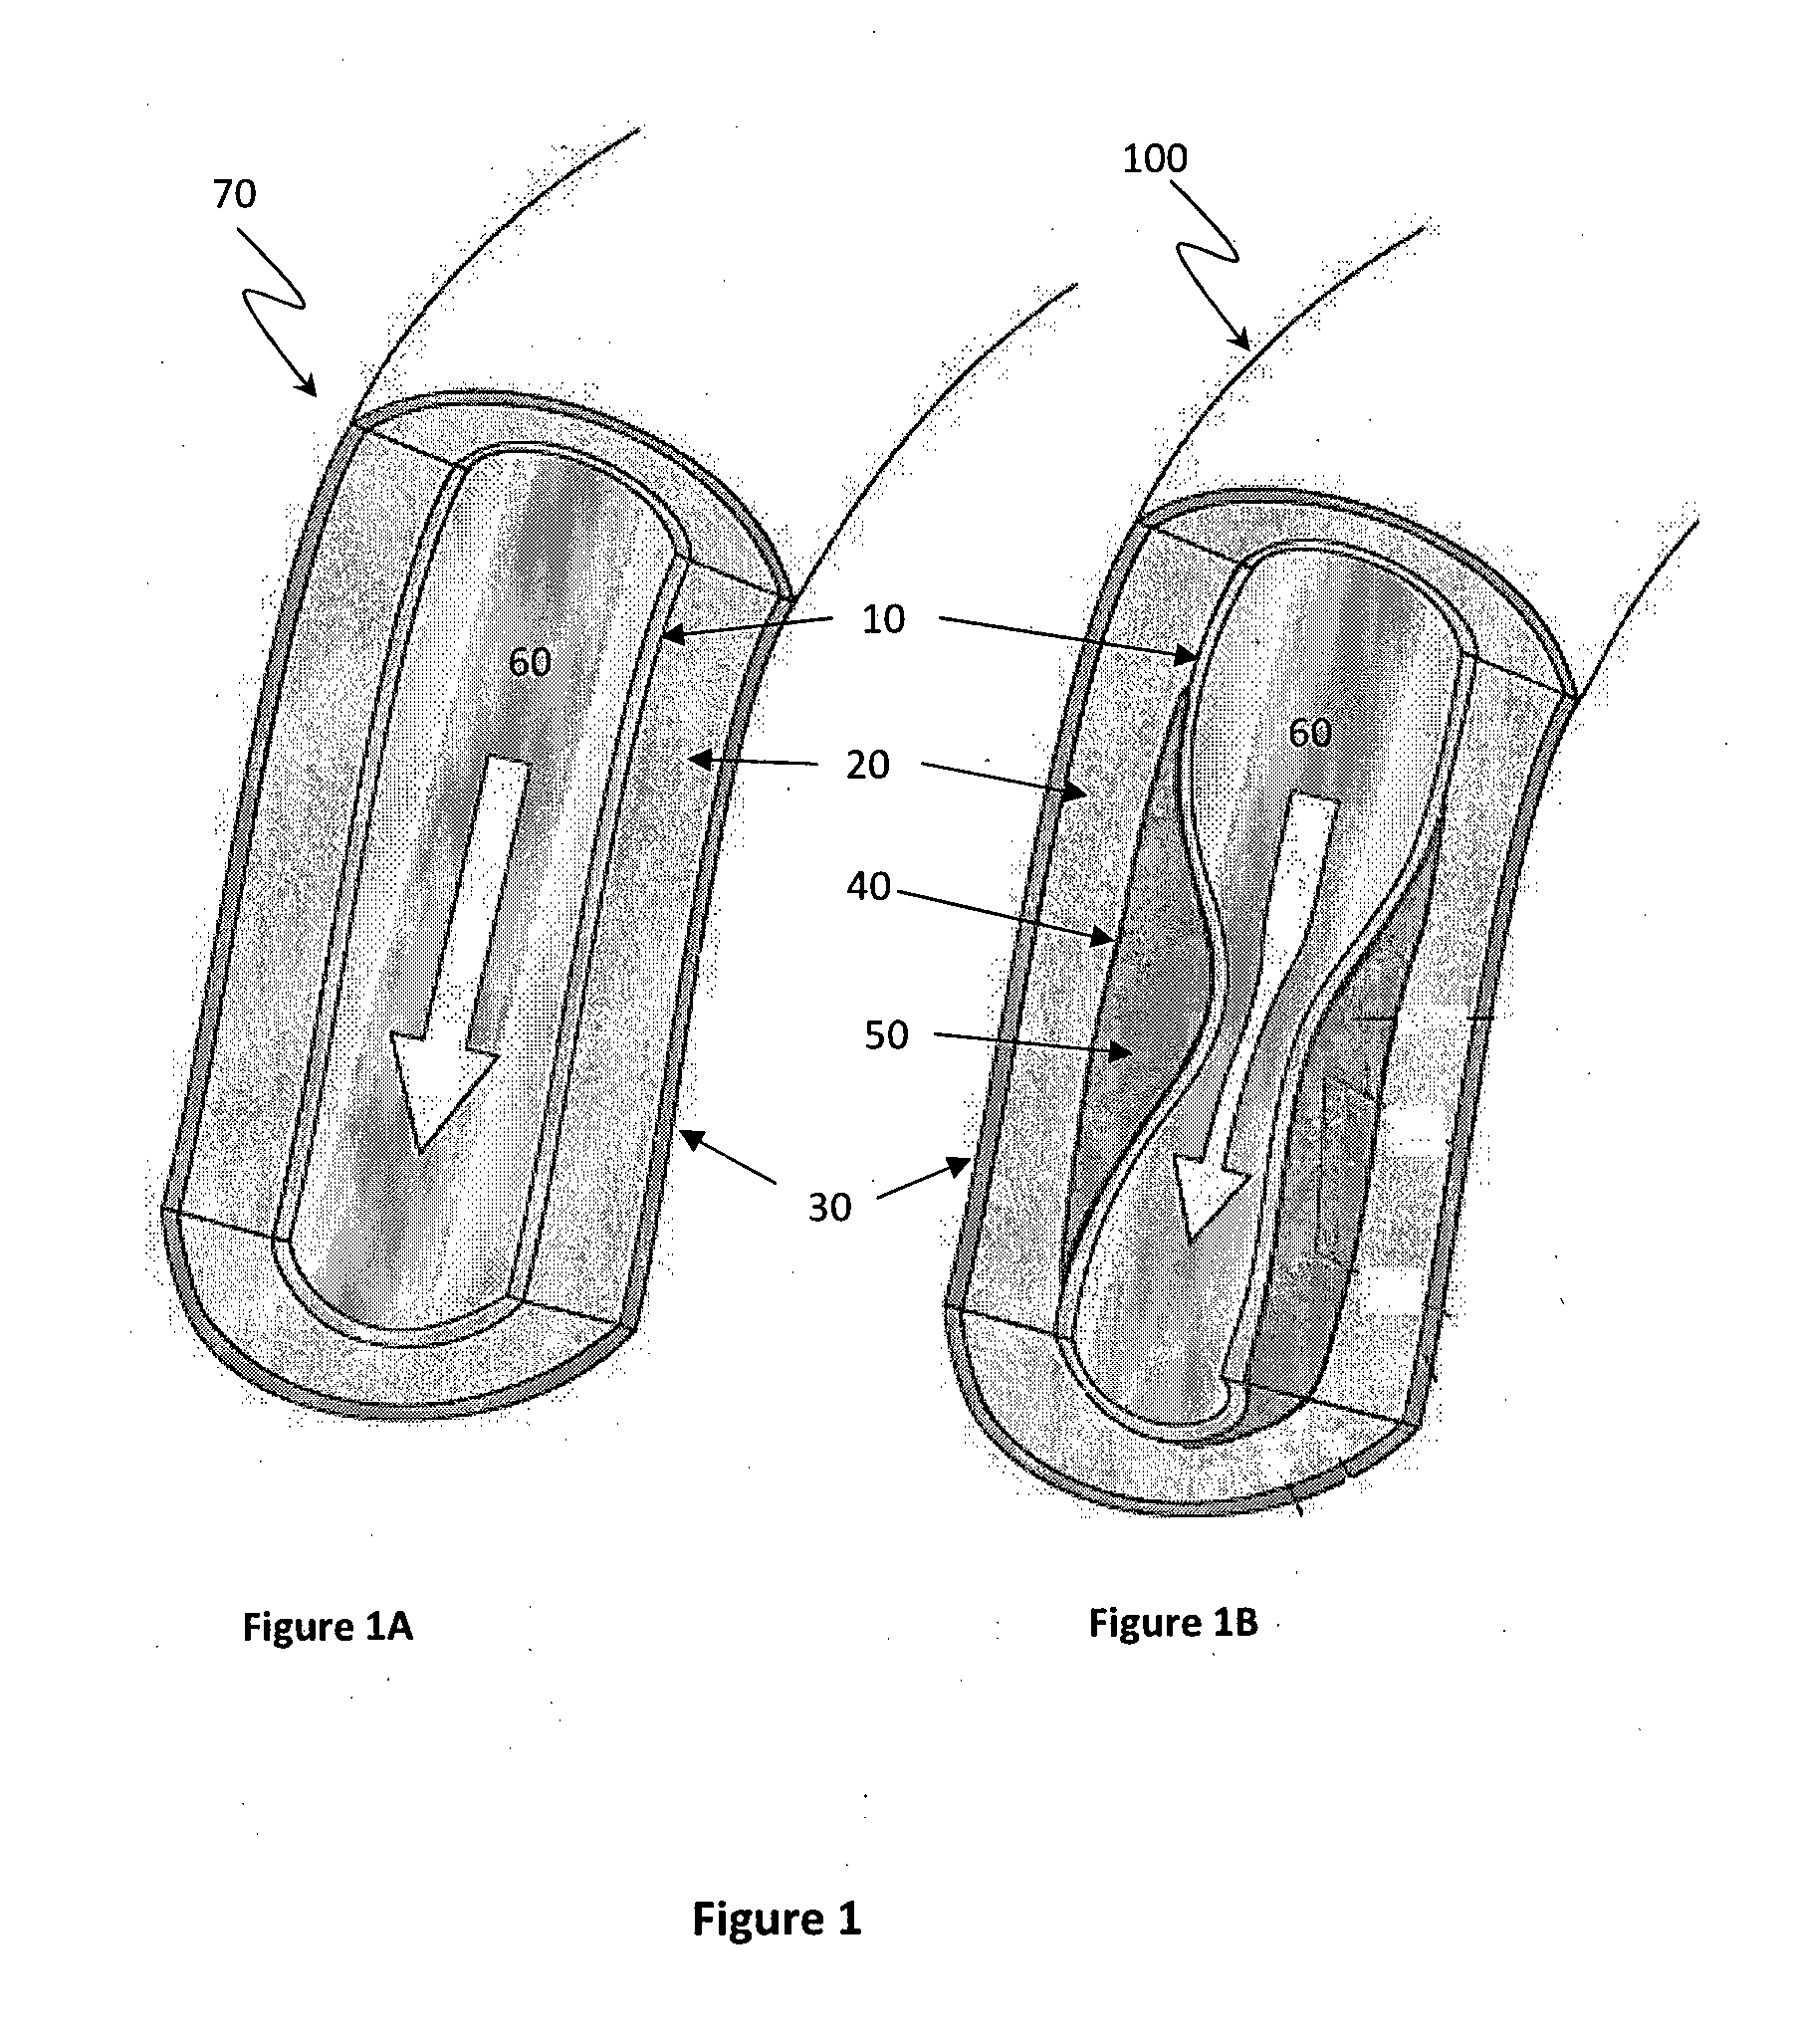 Method and apparatus for eliminating atherosclerosis from a region of the arterial tree